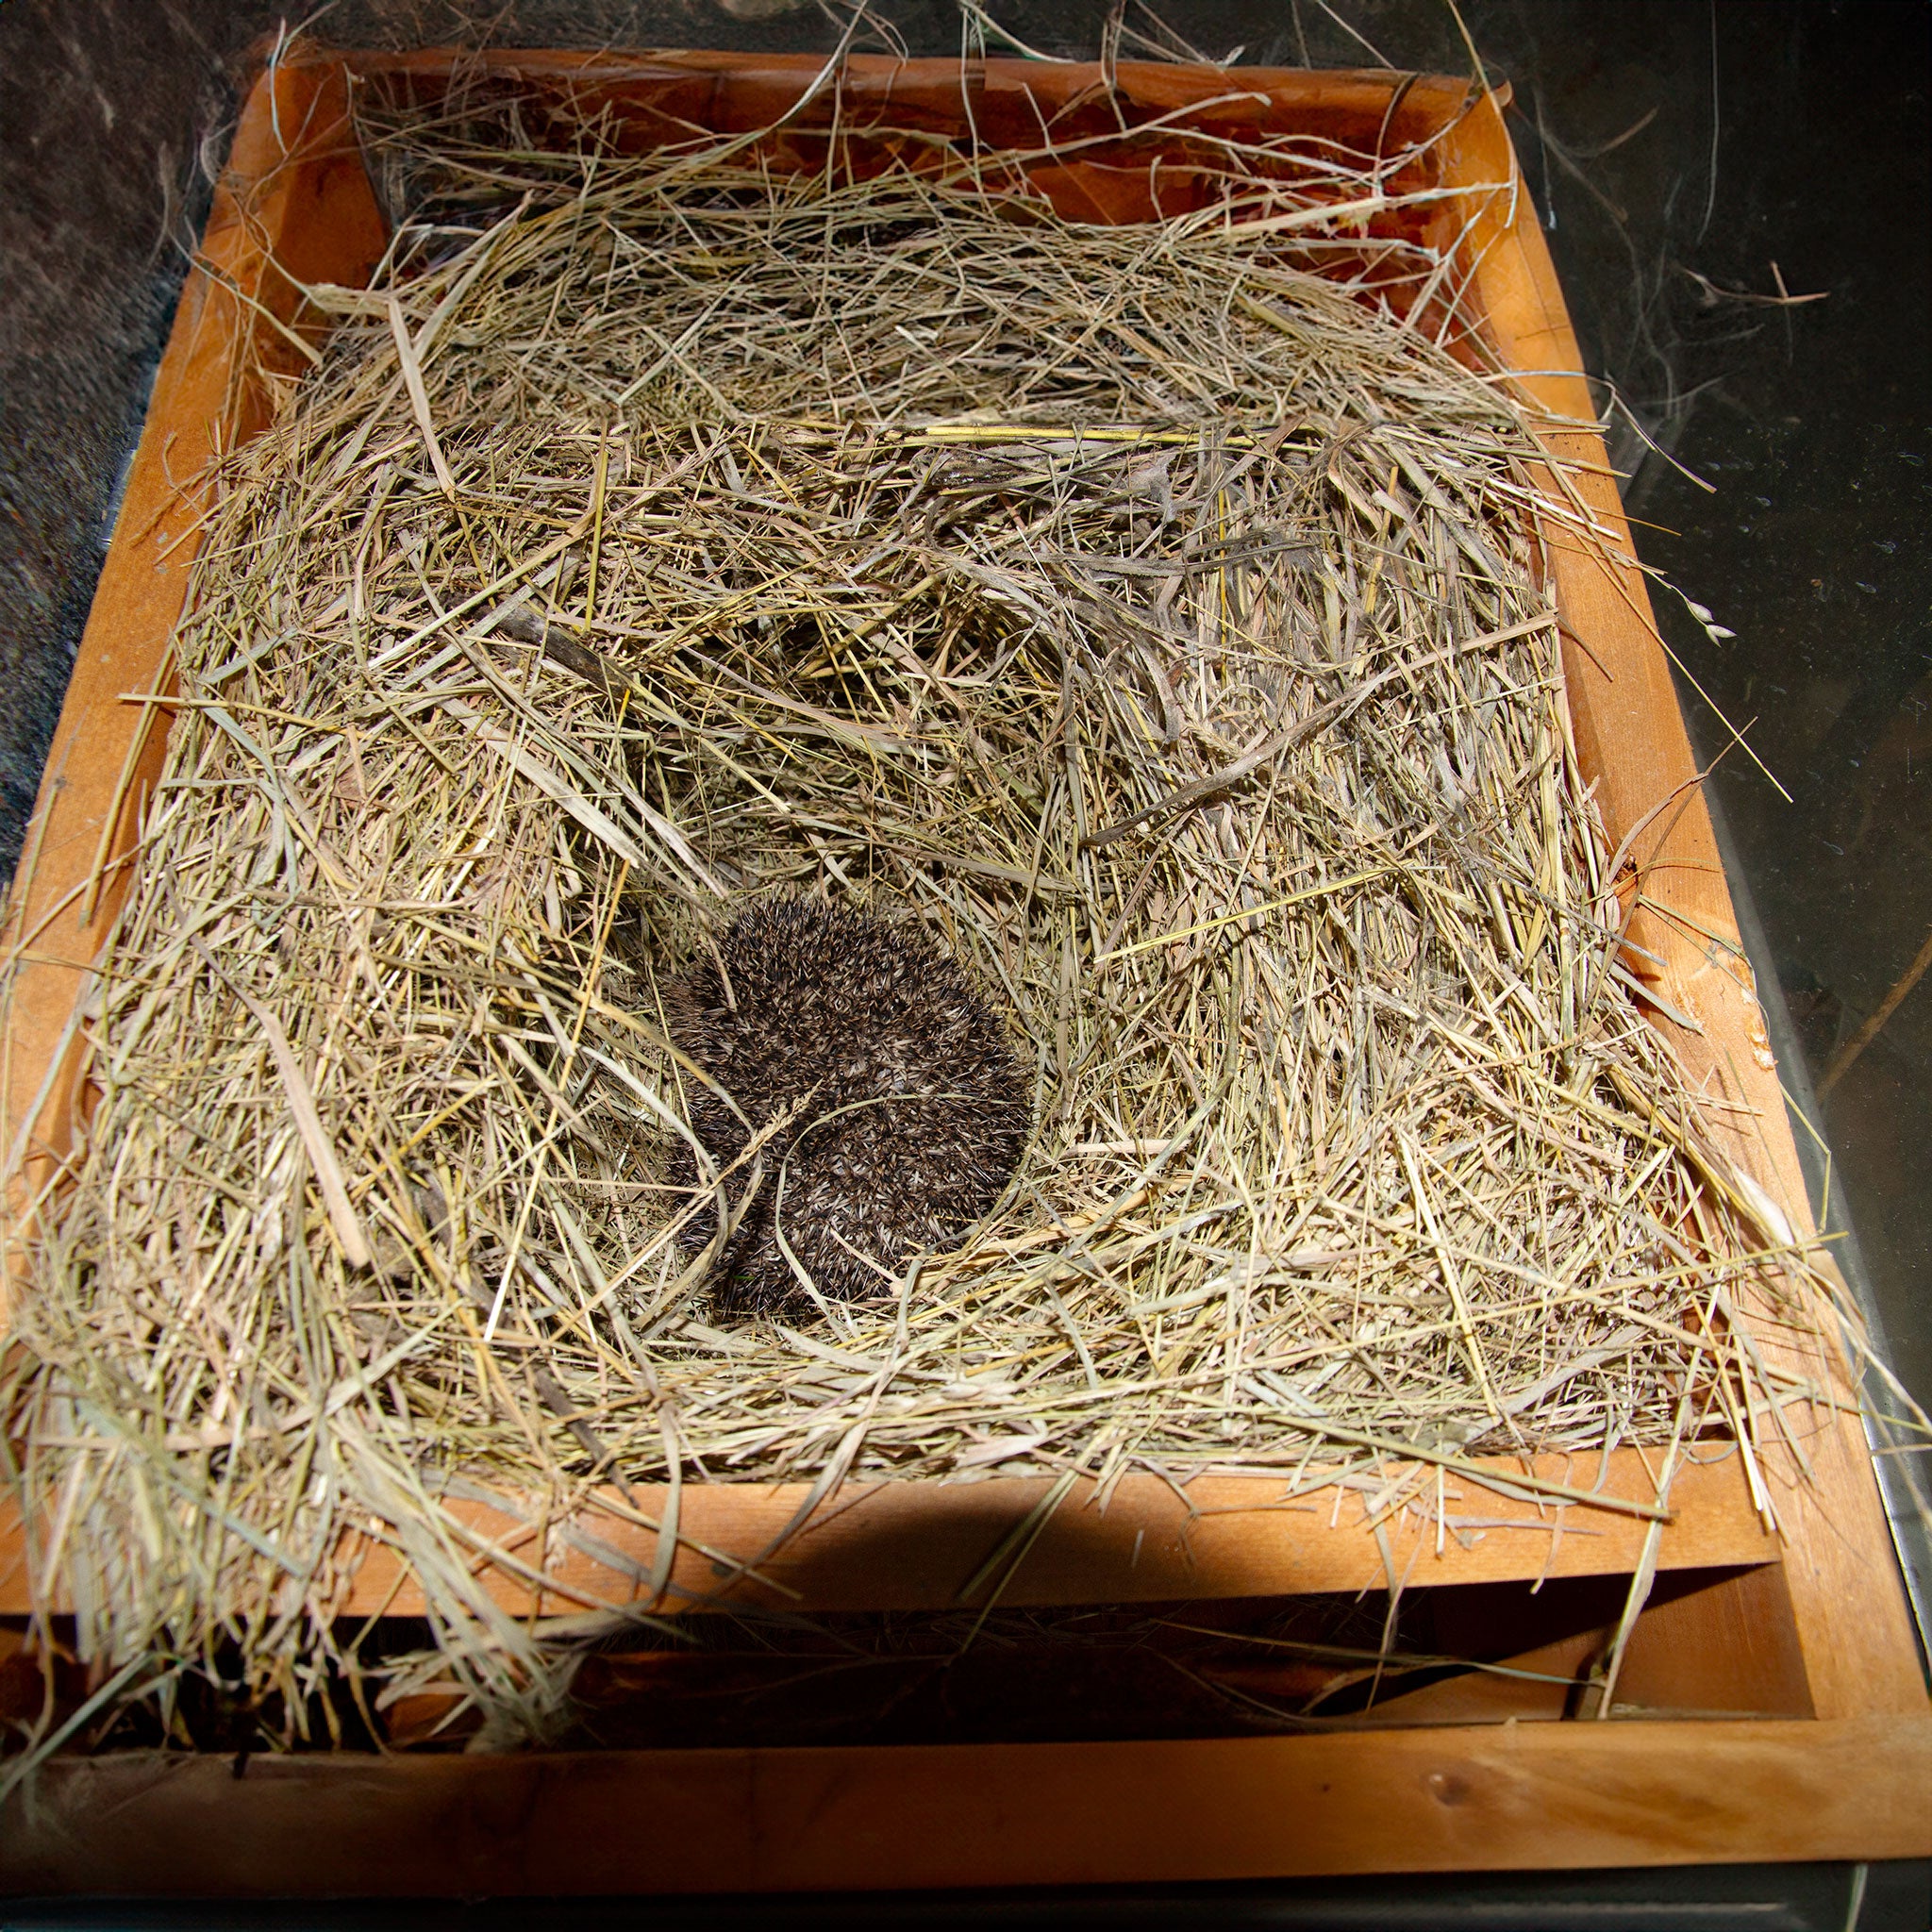 Hedgehog in a hedgehog house surrounded by hay